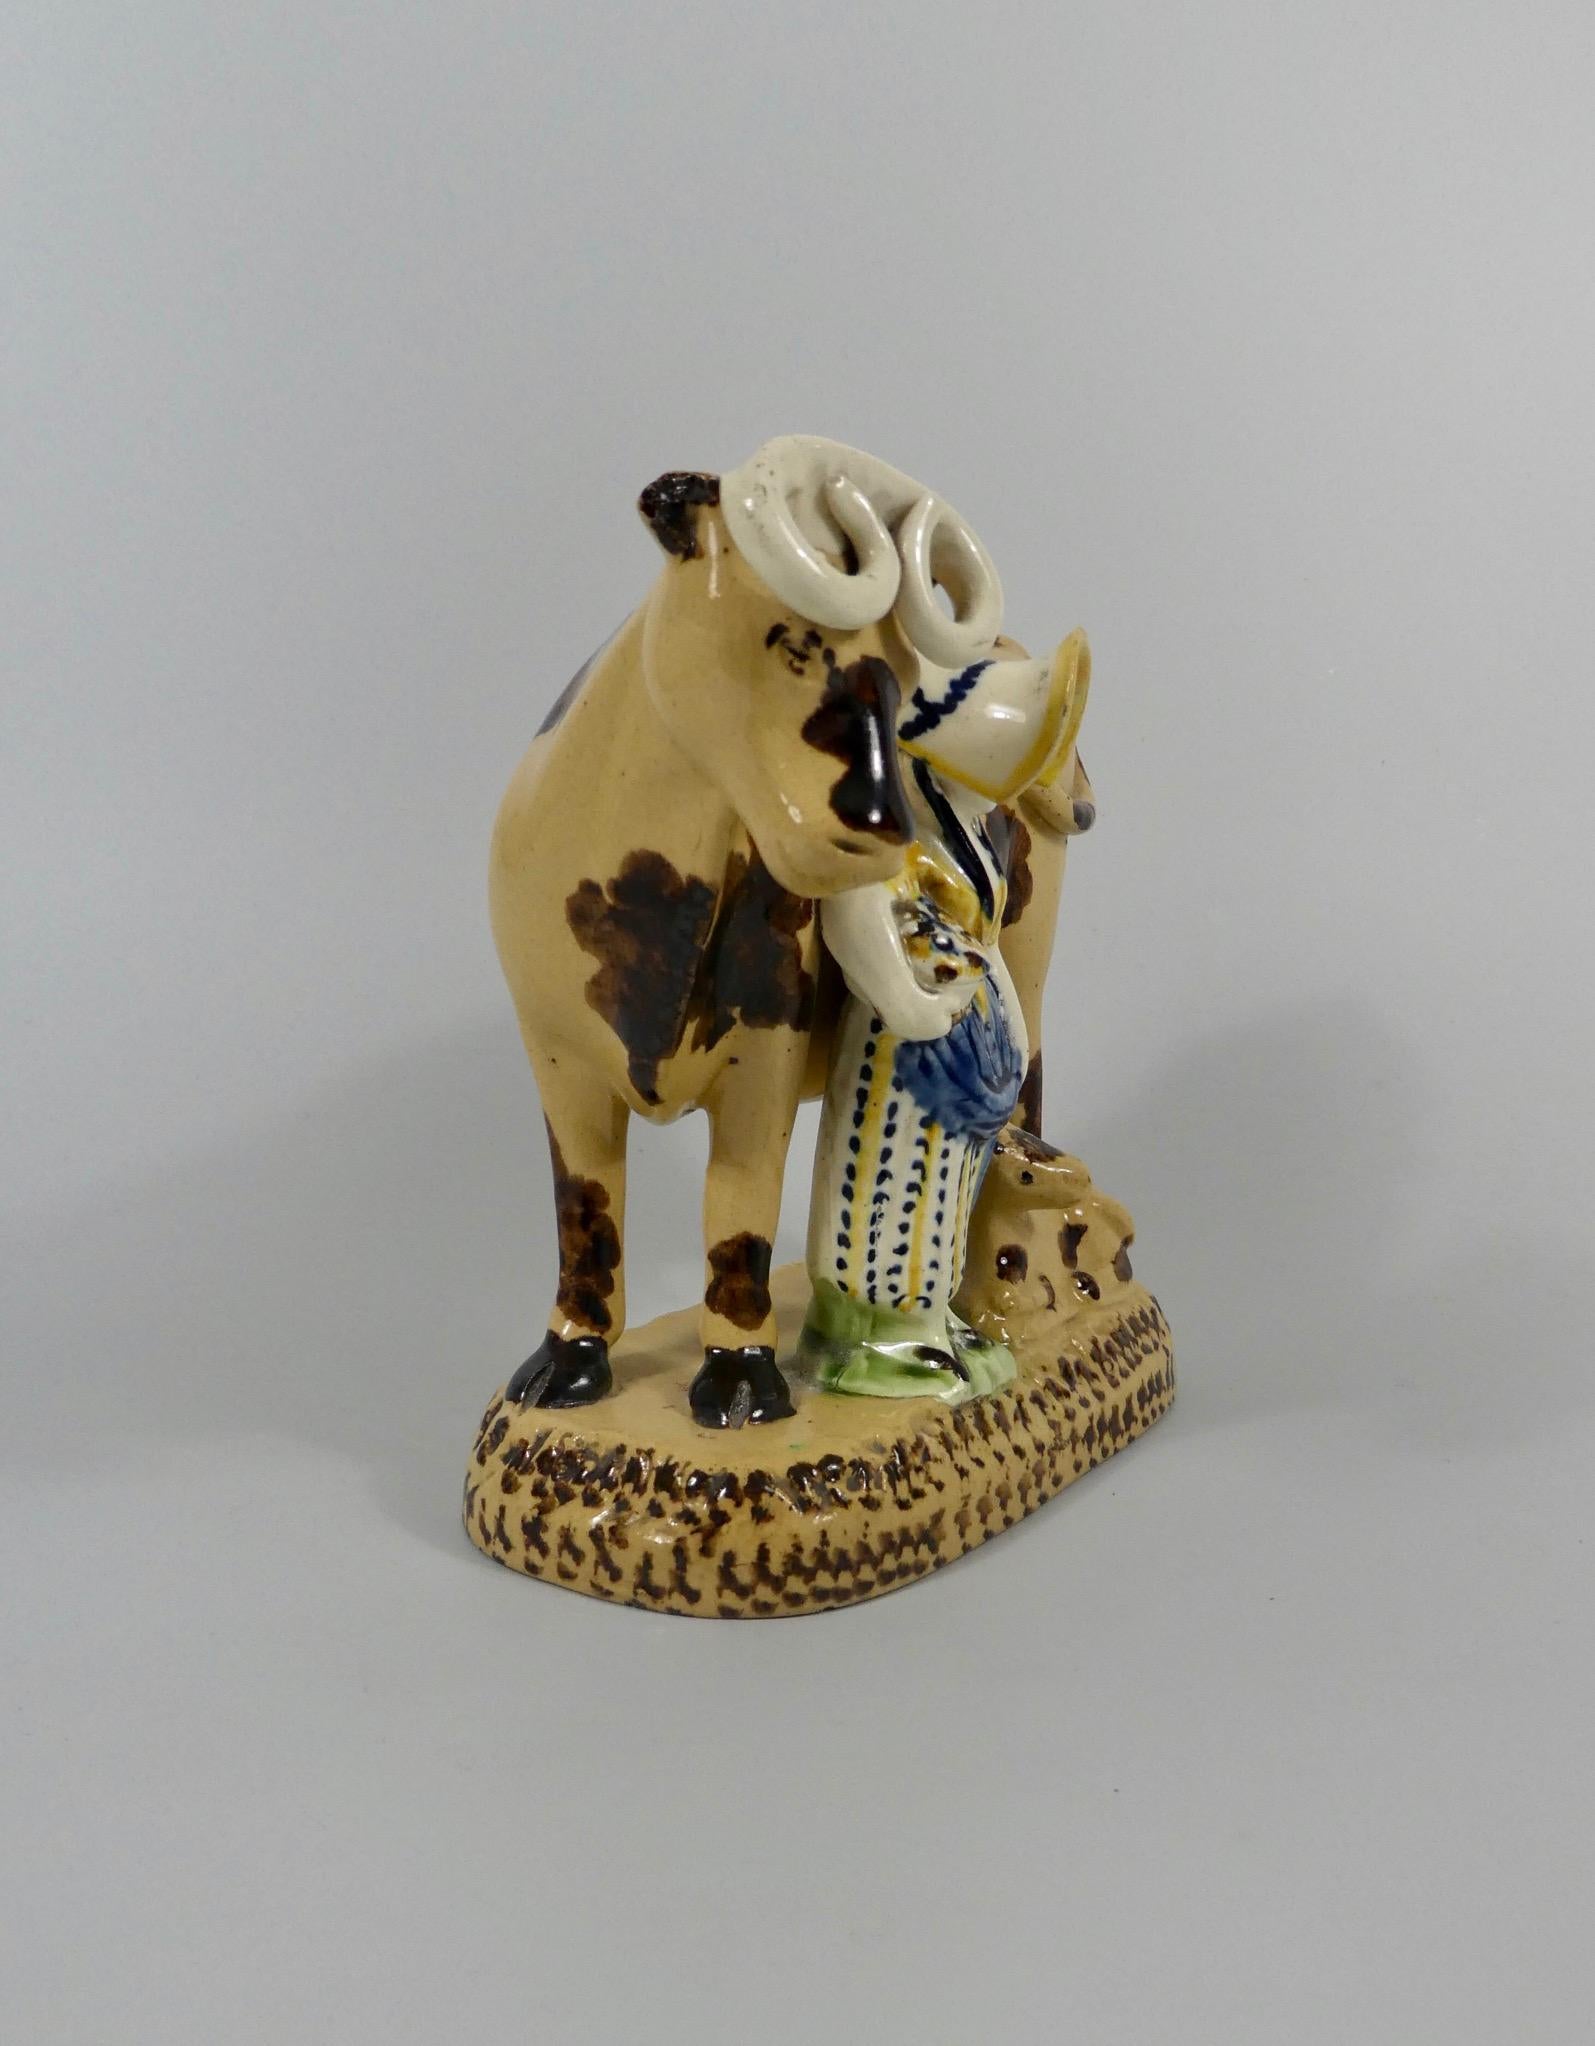 Fired Yorkshire Prattware Shepherdess and Cow Group, circa 1820